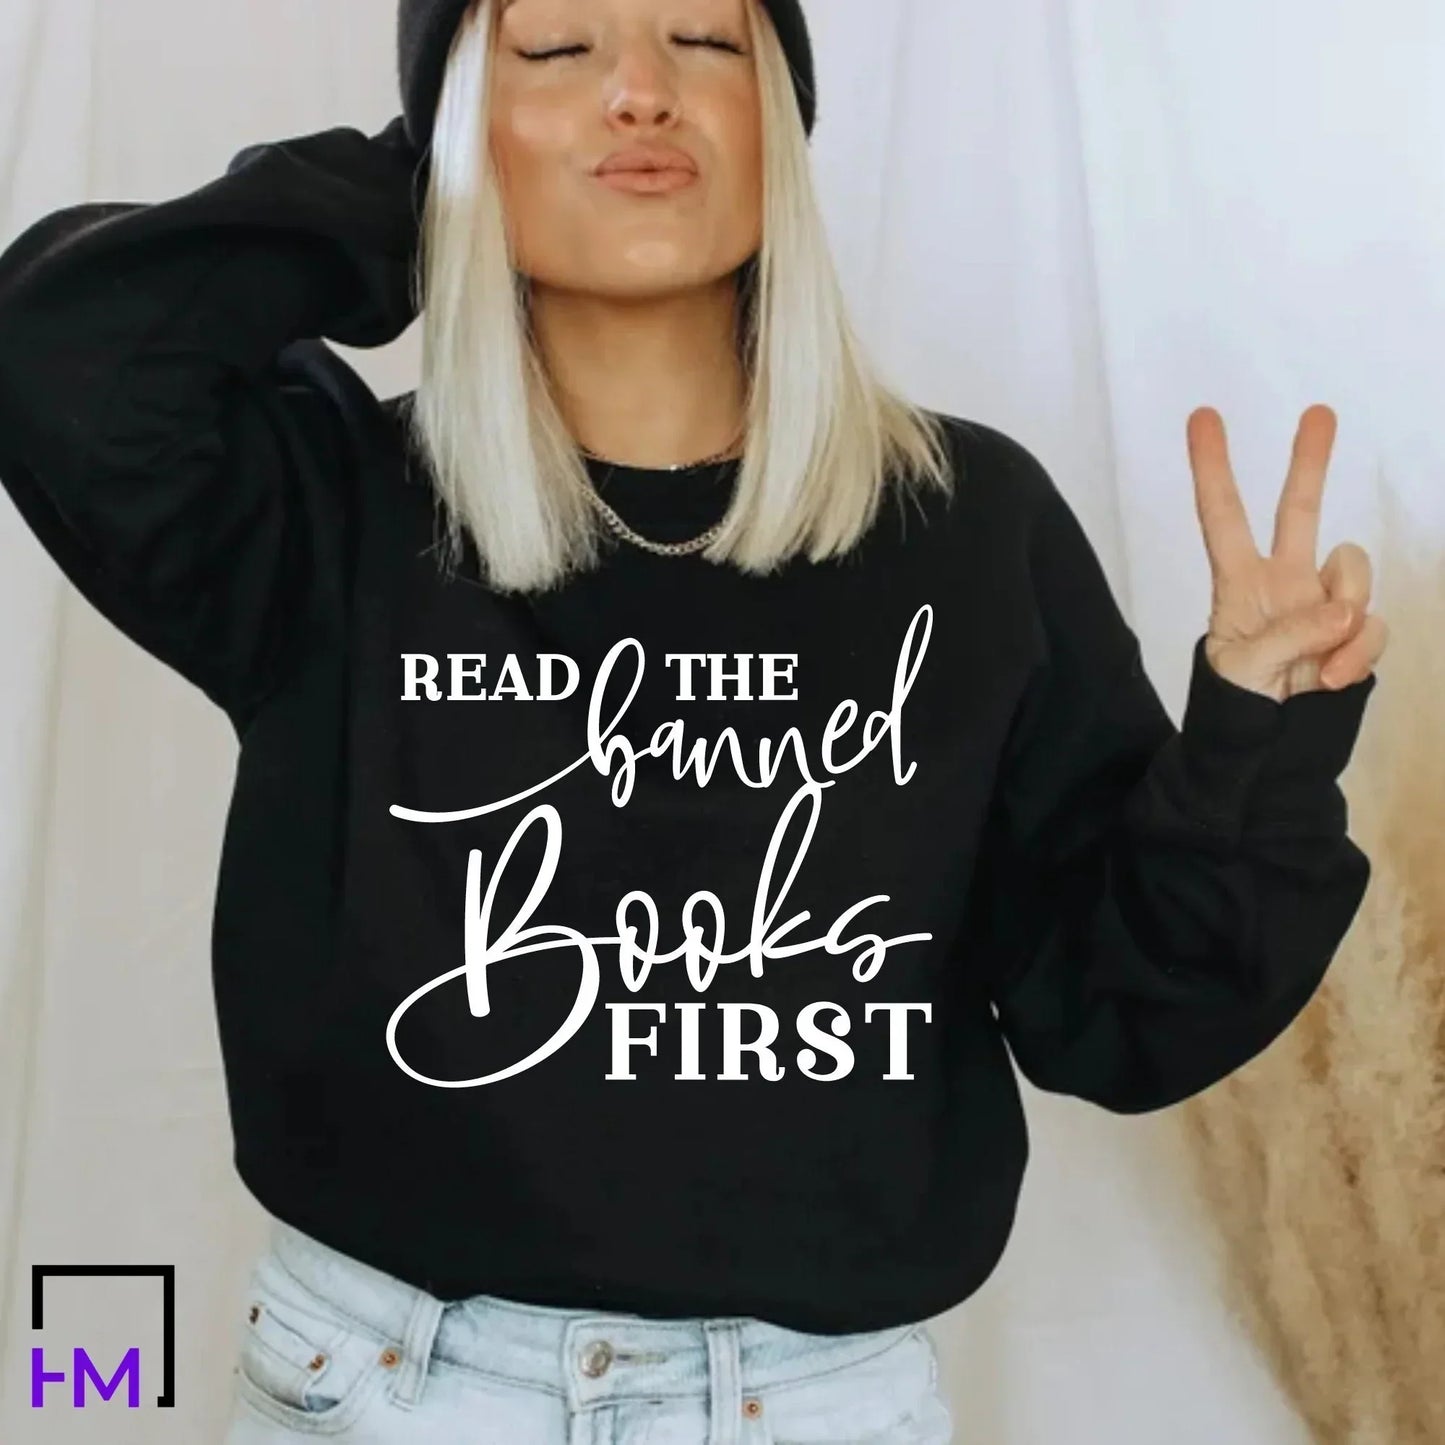 Read Banned Books, Reading Lover Shirt | Gift for Bookworm, English Teacher, Librarian, Writer, Social Justice Protest | Appreciation gift HMDesignStudioUS